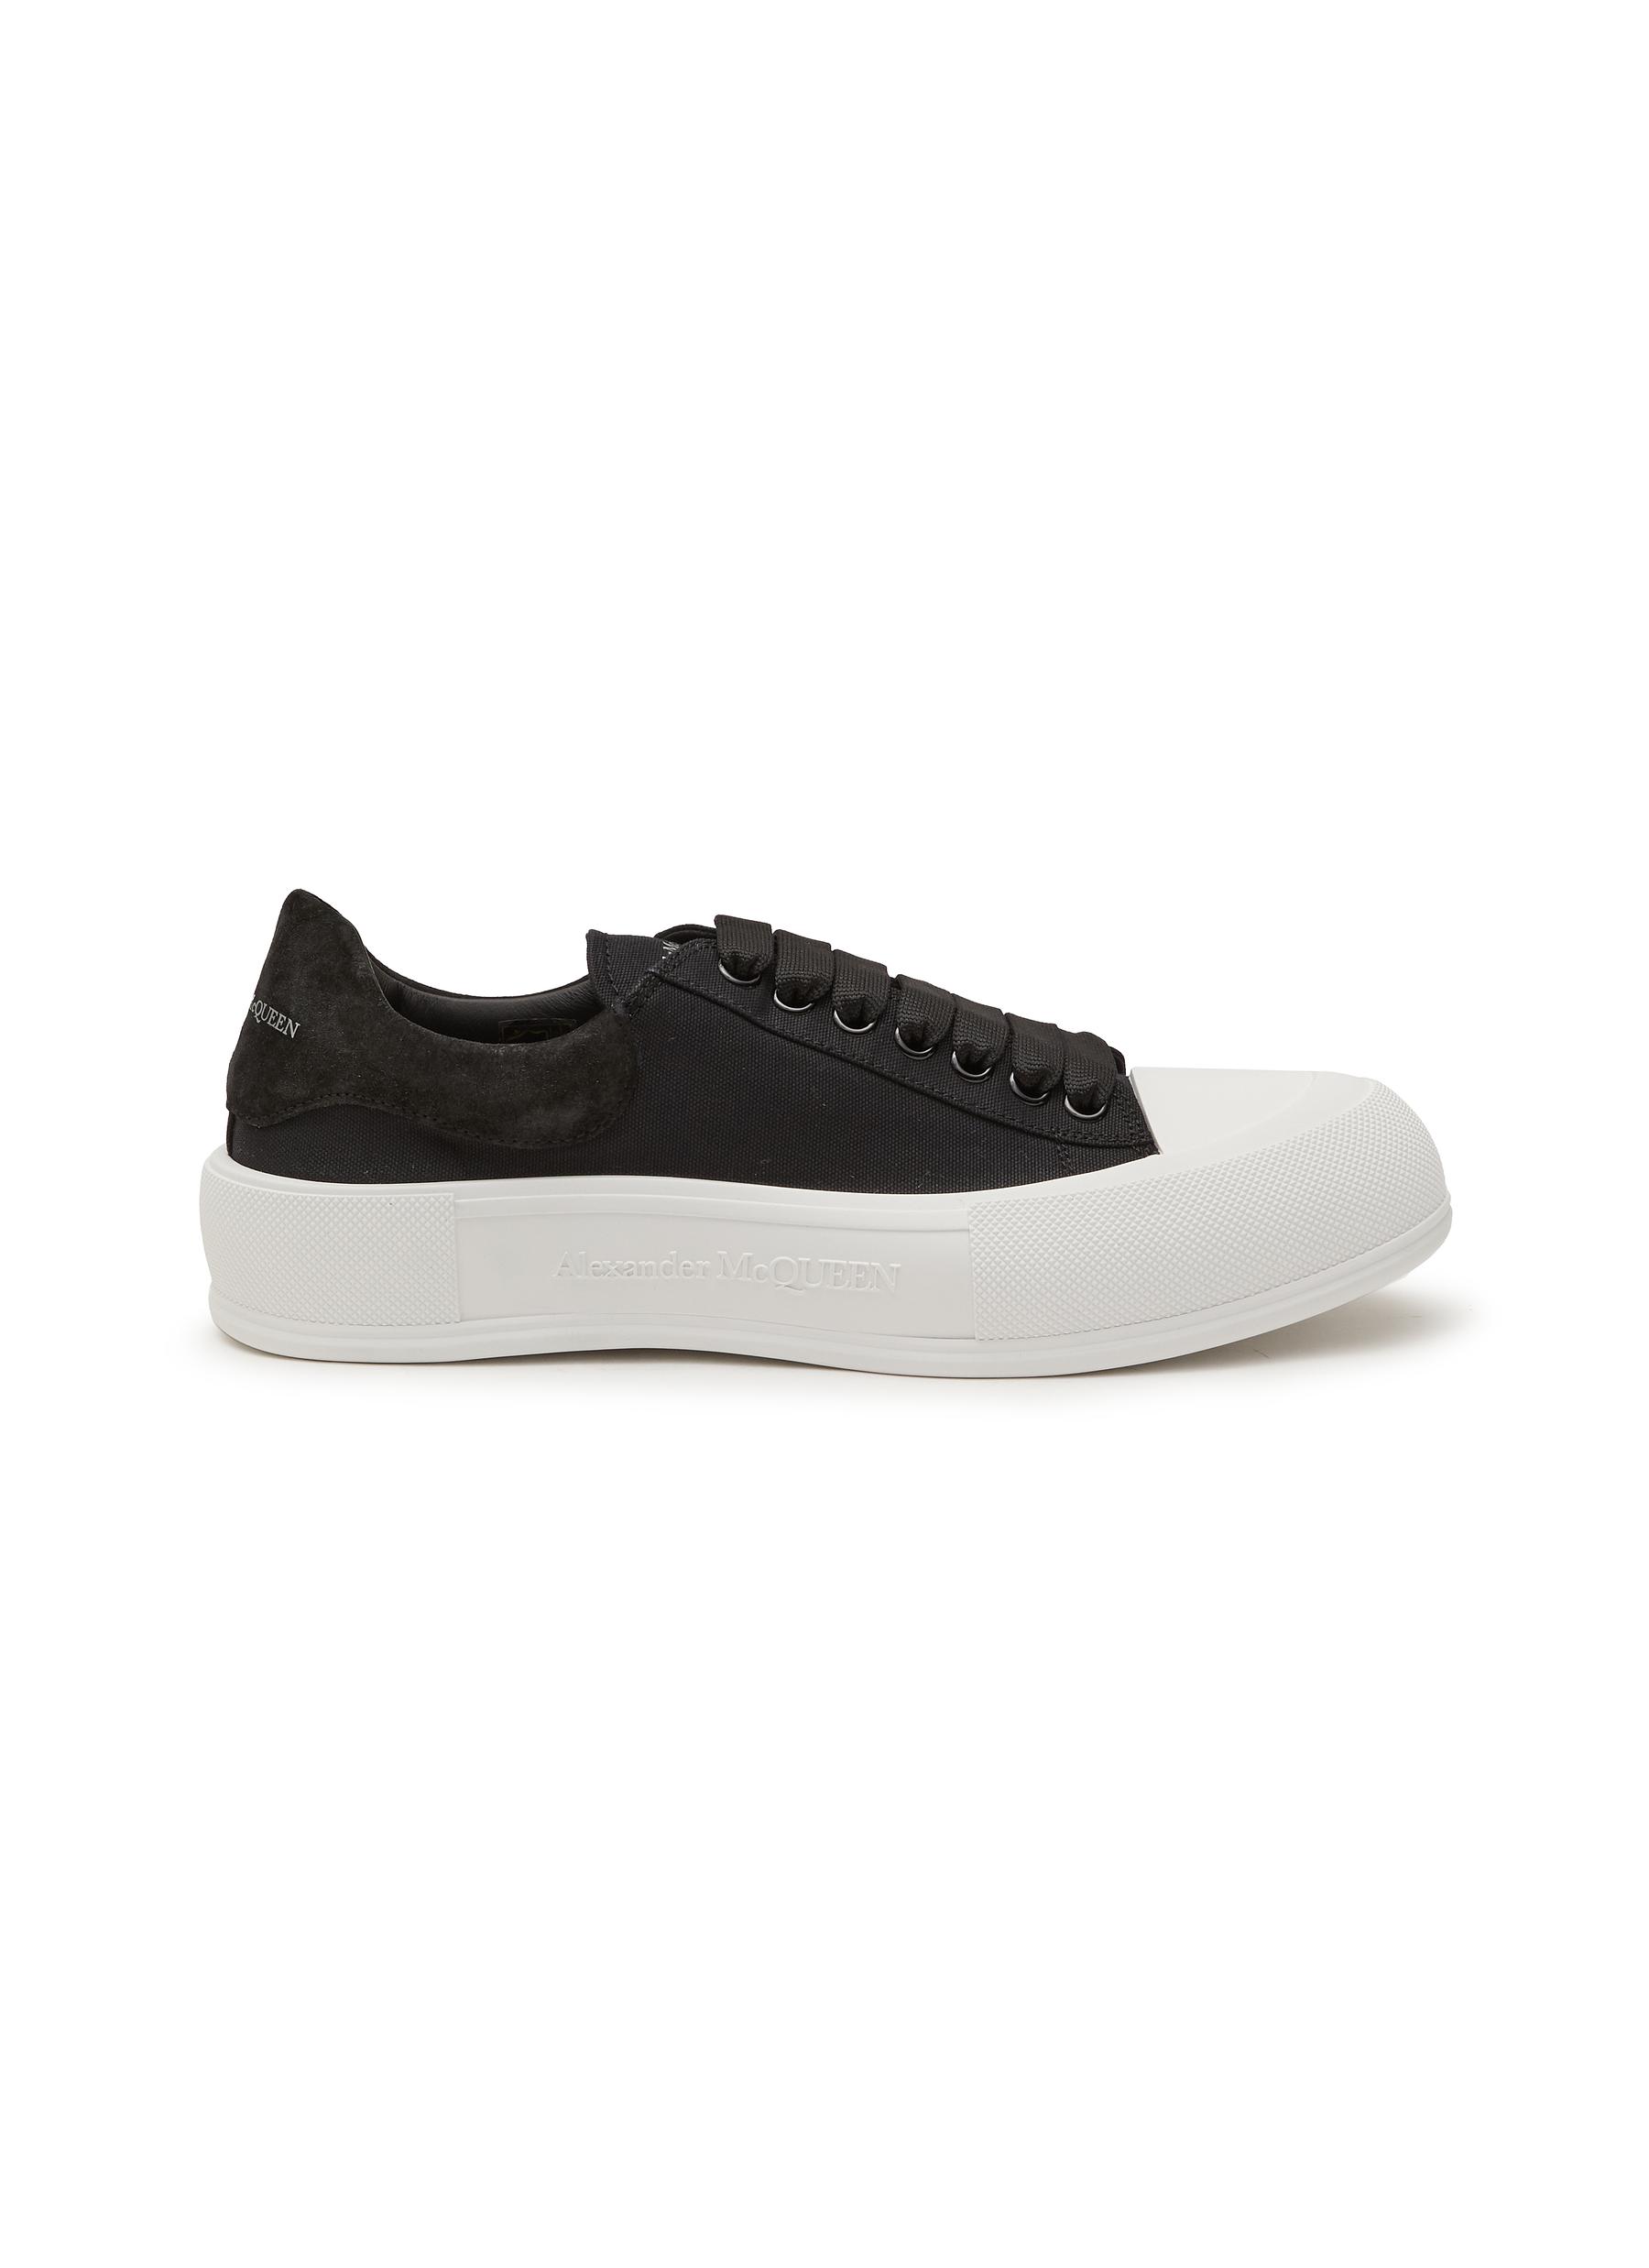 ‘Deck Plimsoll' Canvas Lace-Up Sneakers